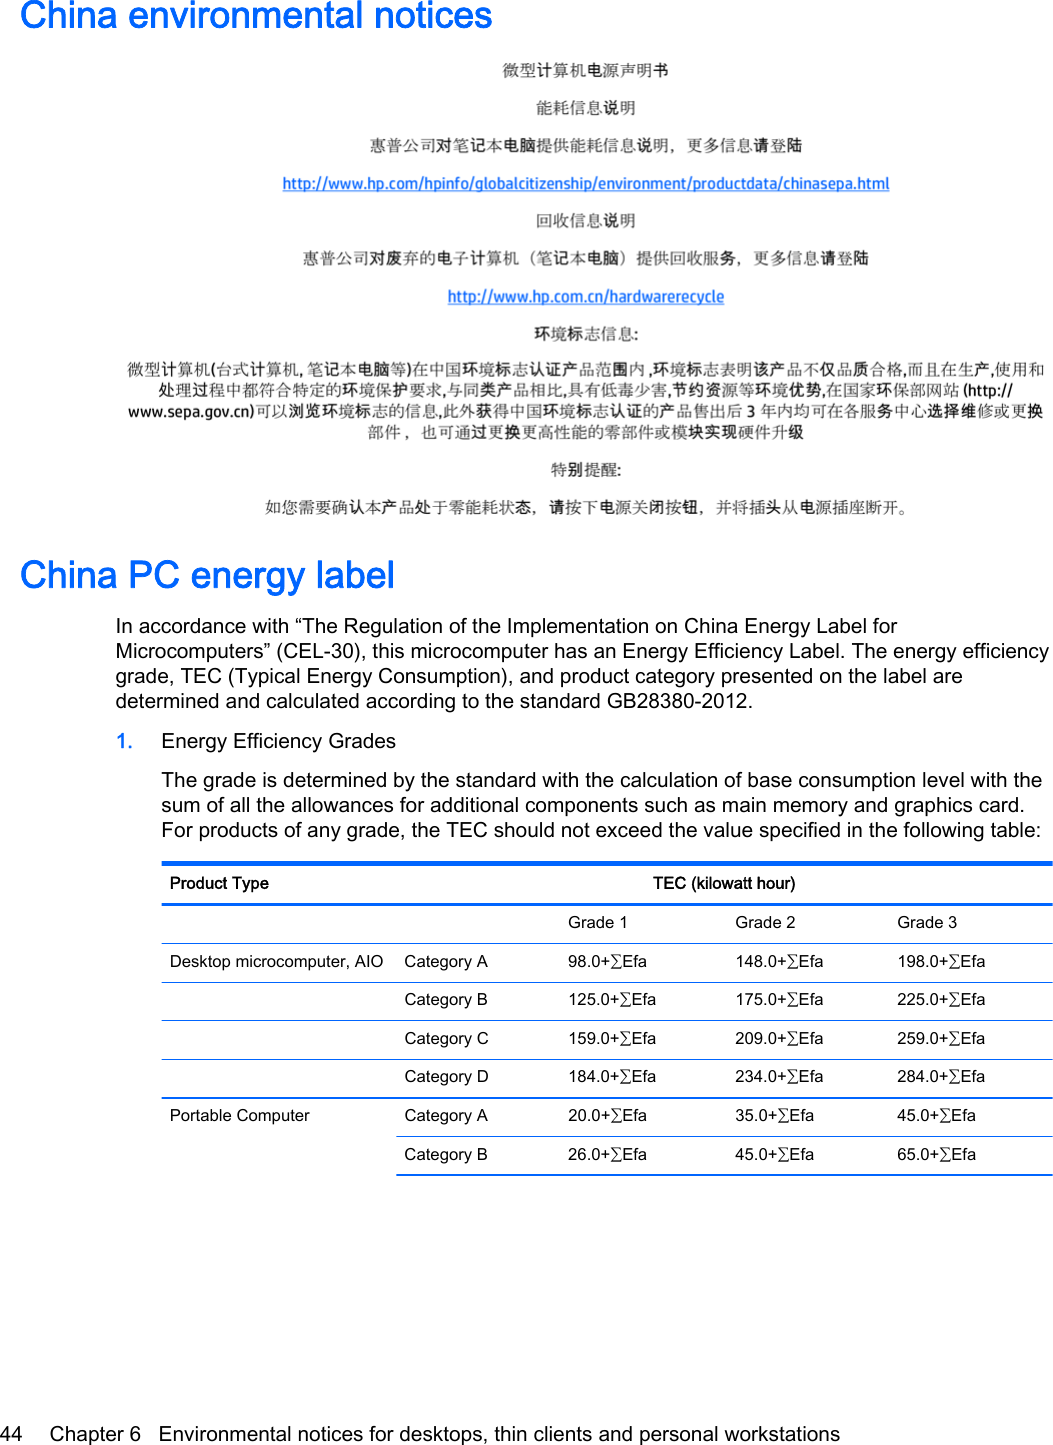 China environmental noticesChina PC energy labelIn accordance with “The Regulation of the Implementation on China Energy Label forMicrocomputers” (CEL-30), this microcomputer has an Energy Efficiency Label. The energy efficiencygrade, TEC (Typical Energy Consumption), and product category presented on the label aredetermined and calculated according to the standard GB28380-2012.1. Energy Efficiency GradesThe grade is determined by the standard with the calculation of base consumption level with thesum of all the allowances for additional components such as main memory and graphics card.For products of any grade, the TEC should not exceed the value specified in the following table:Product Type TEC (kilowatt hour)    Grade 1 Grade 2 Grade 3Desktop microcomputer, AIO Category A 98.0+∑Efa 148.0+∑Efa 198.0+∑Efa  Category B 125.0+∑Efa 175.0+∑Efa 225.0+∑Efa  Category C 159.0+∑Efa 209.0+∑Efa 259.0+∑Efa  Category D 184.0+∑Efa 234.0+∑Efa 284.0+∑EfaPortable Computer Category A 20.0+∑Efa 35.0+∑Efa 45.0+∑EfaCategory B 26.0+∑Efa 45.0+∑Efa 65.0+∑Efa44 Chapter 6   Environmental notices for desktops, thin clients and personal workstations